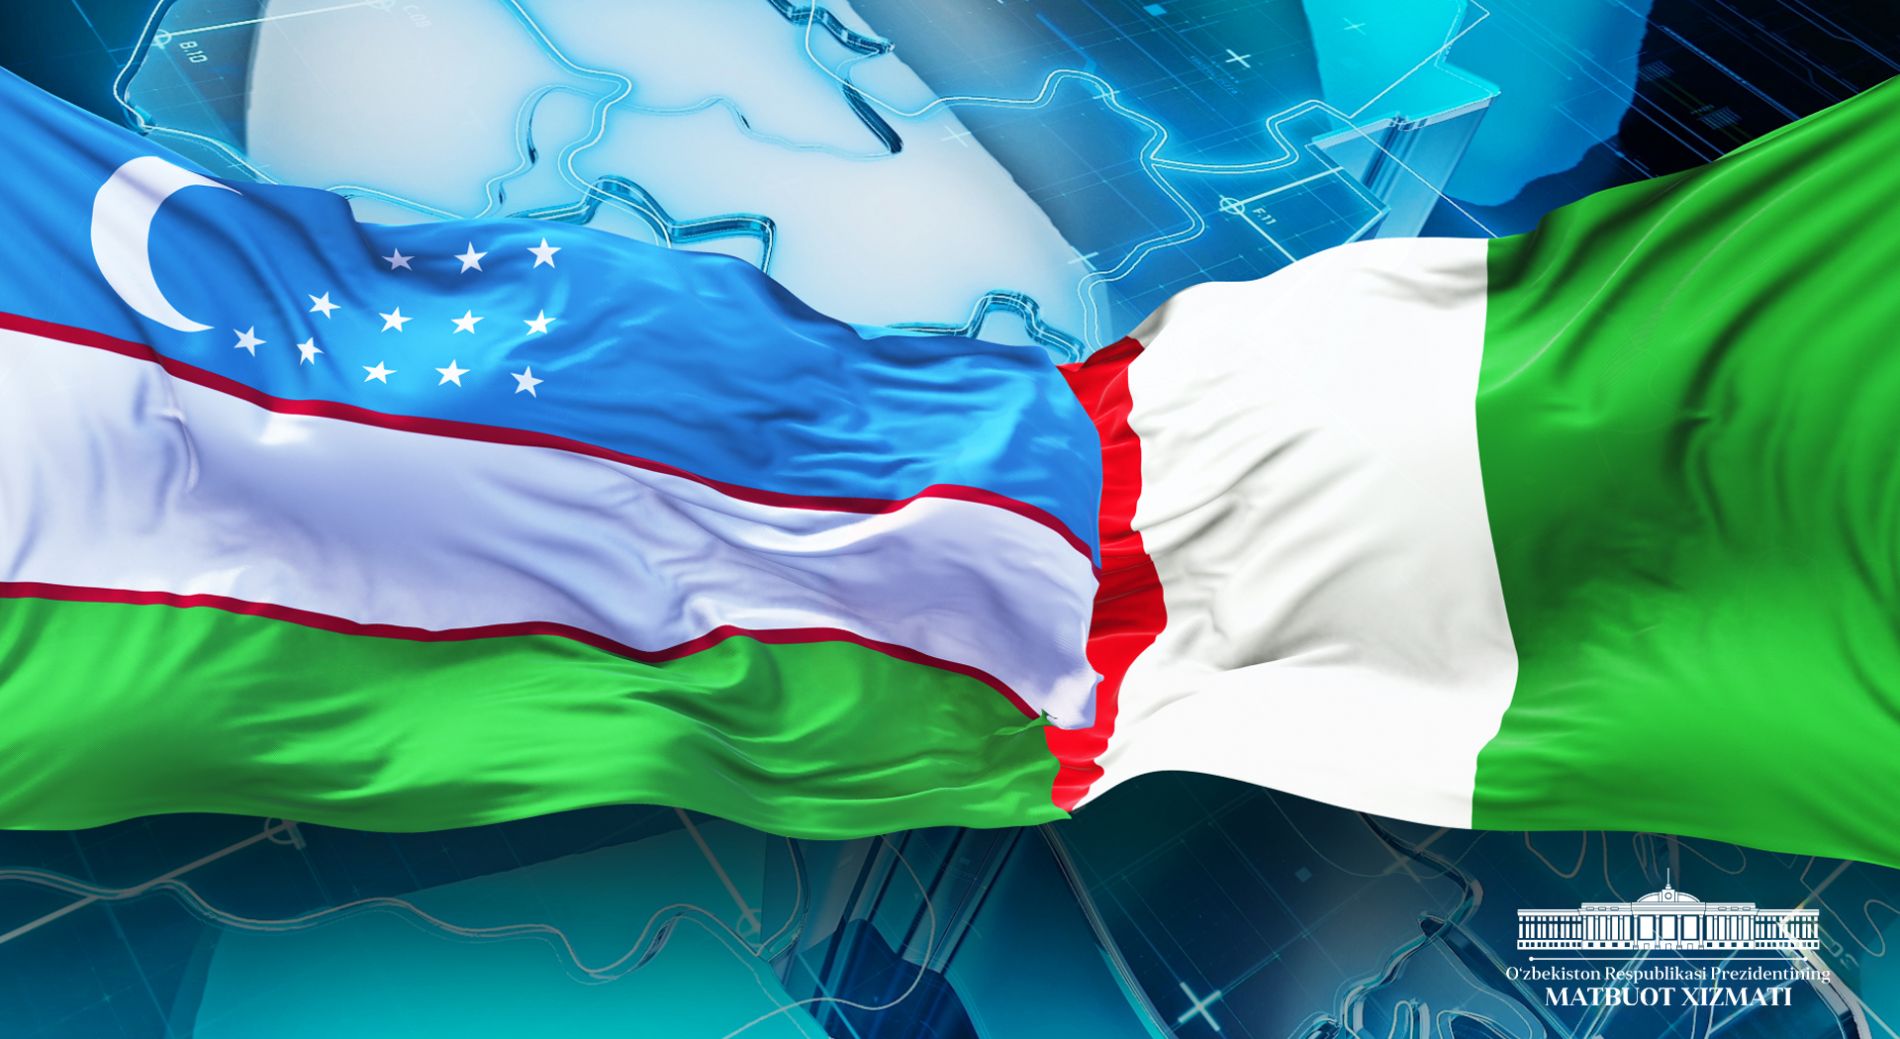 Uzbekistan and Italy collaborate on global platforms, fostering trust and partnership